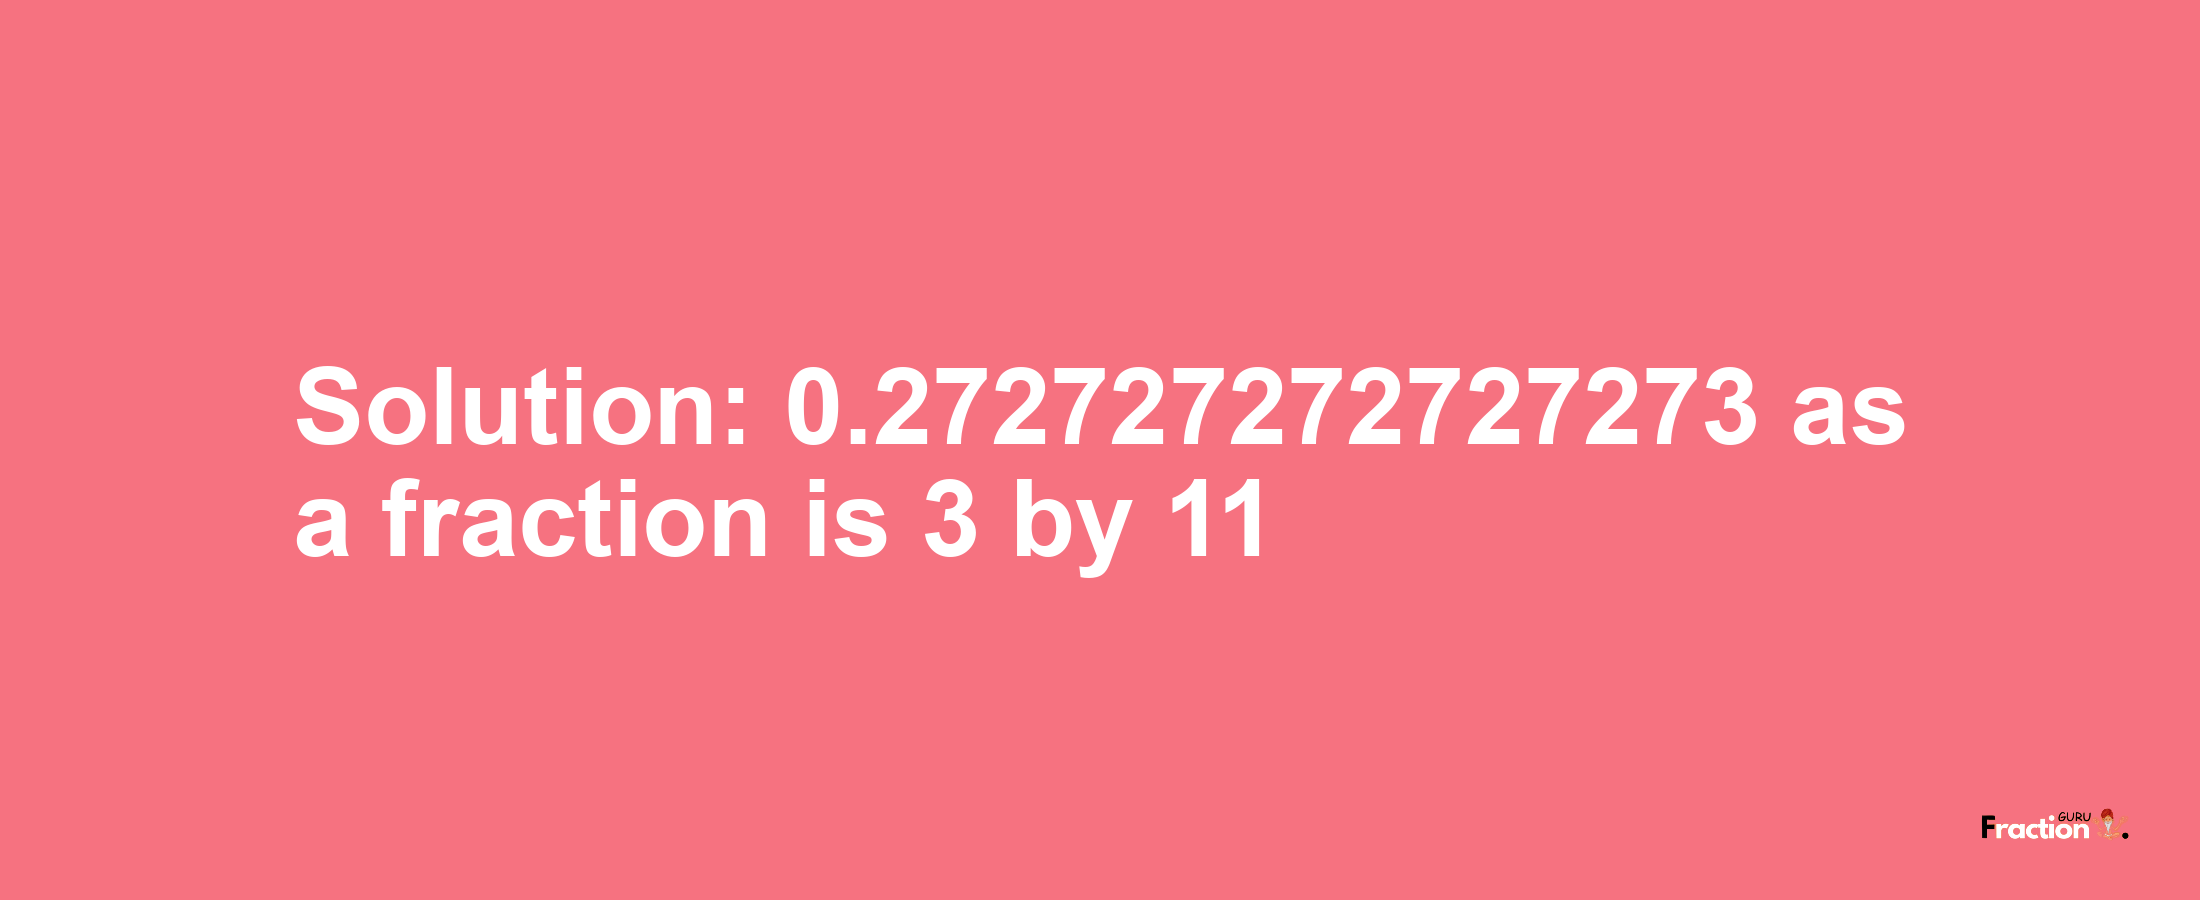 Solution:0.272727272727273 as a fraction is 3/11